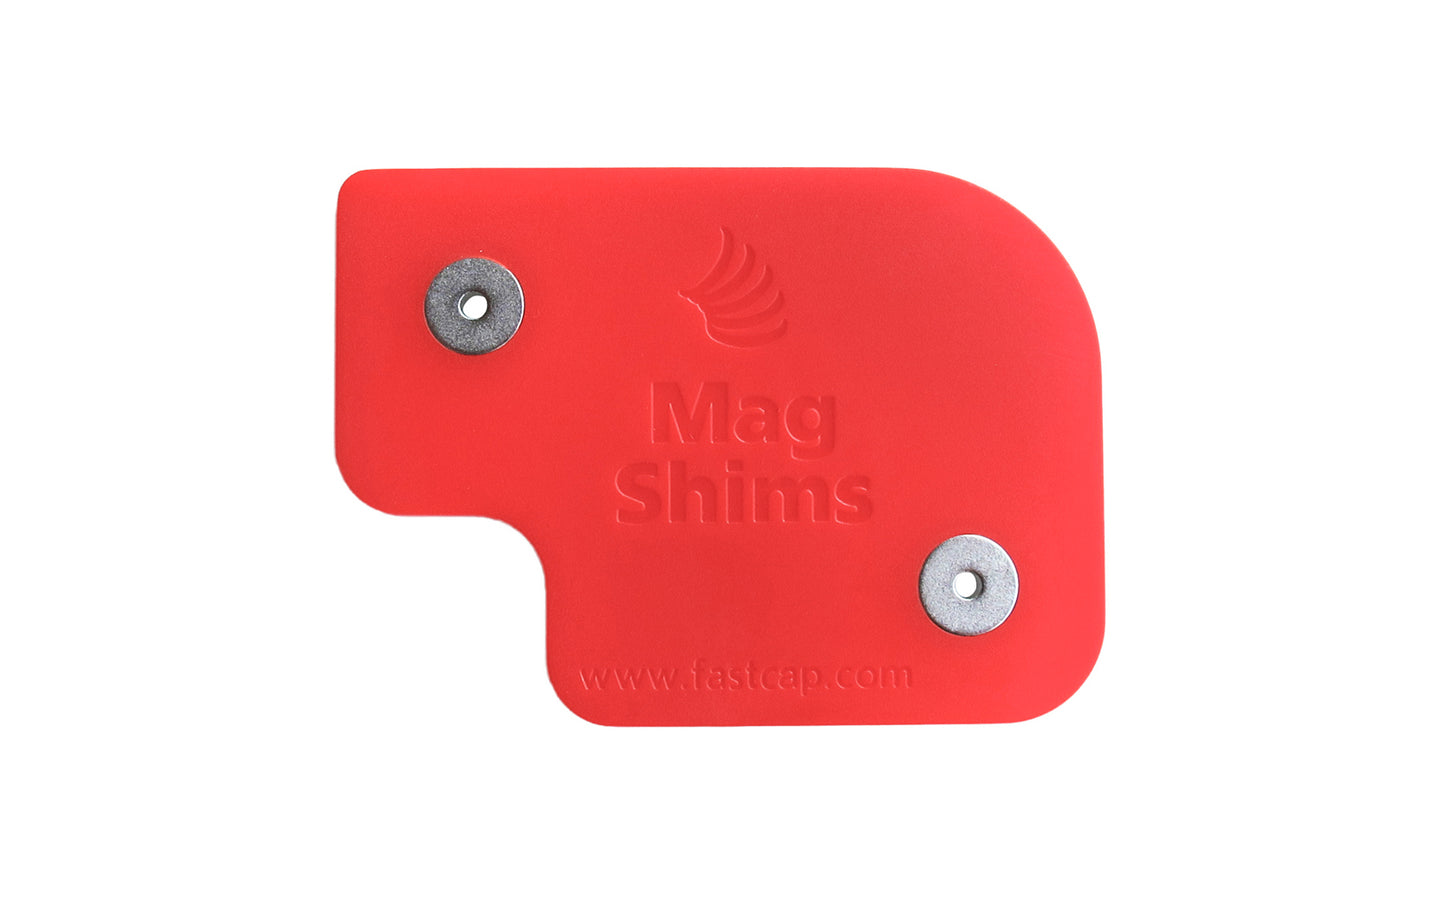 FastCap Mag Shim Metric - Magnetic shims for tool alignment - Great for table saws, band saws, drill presses, cabinet drawers & frames - Metric 